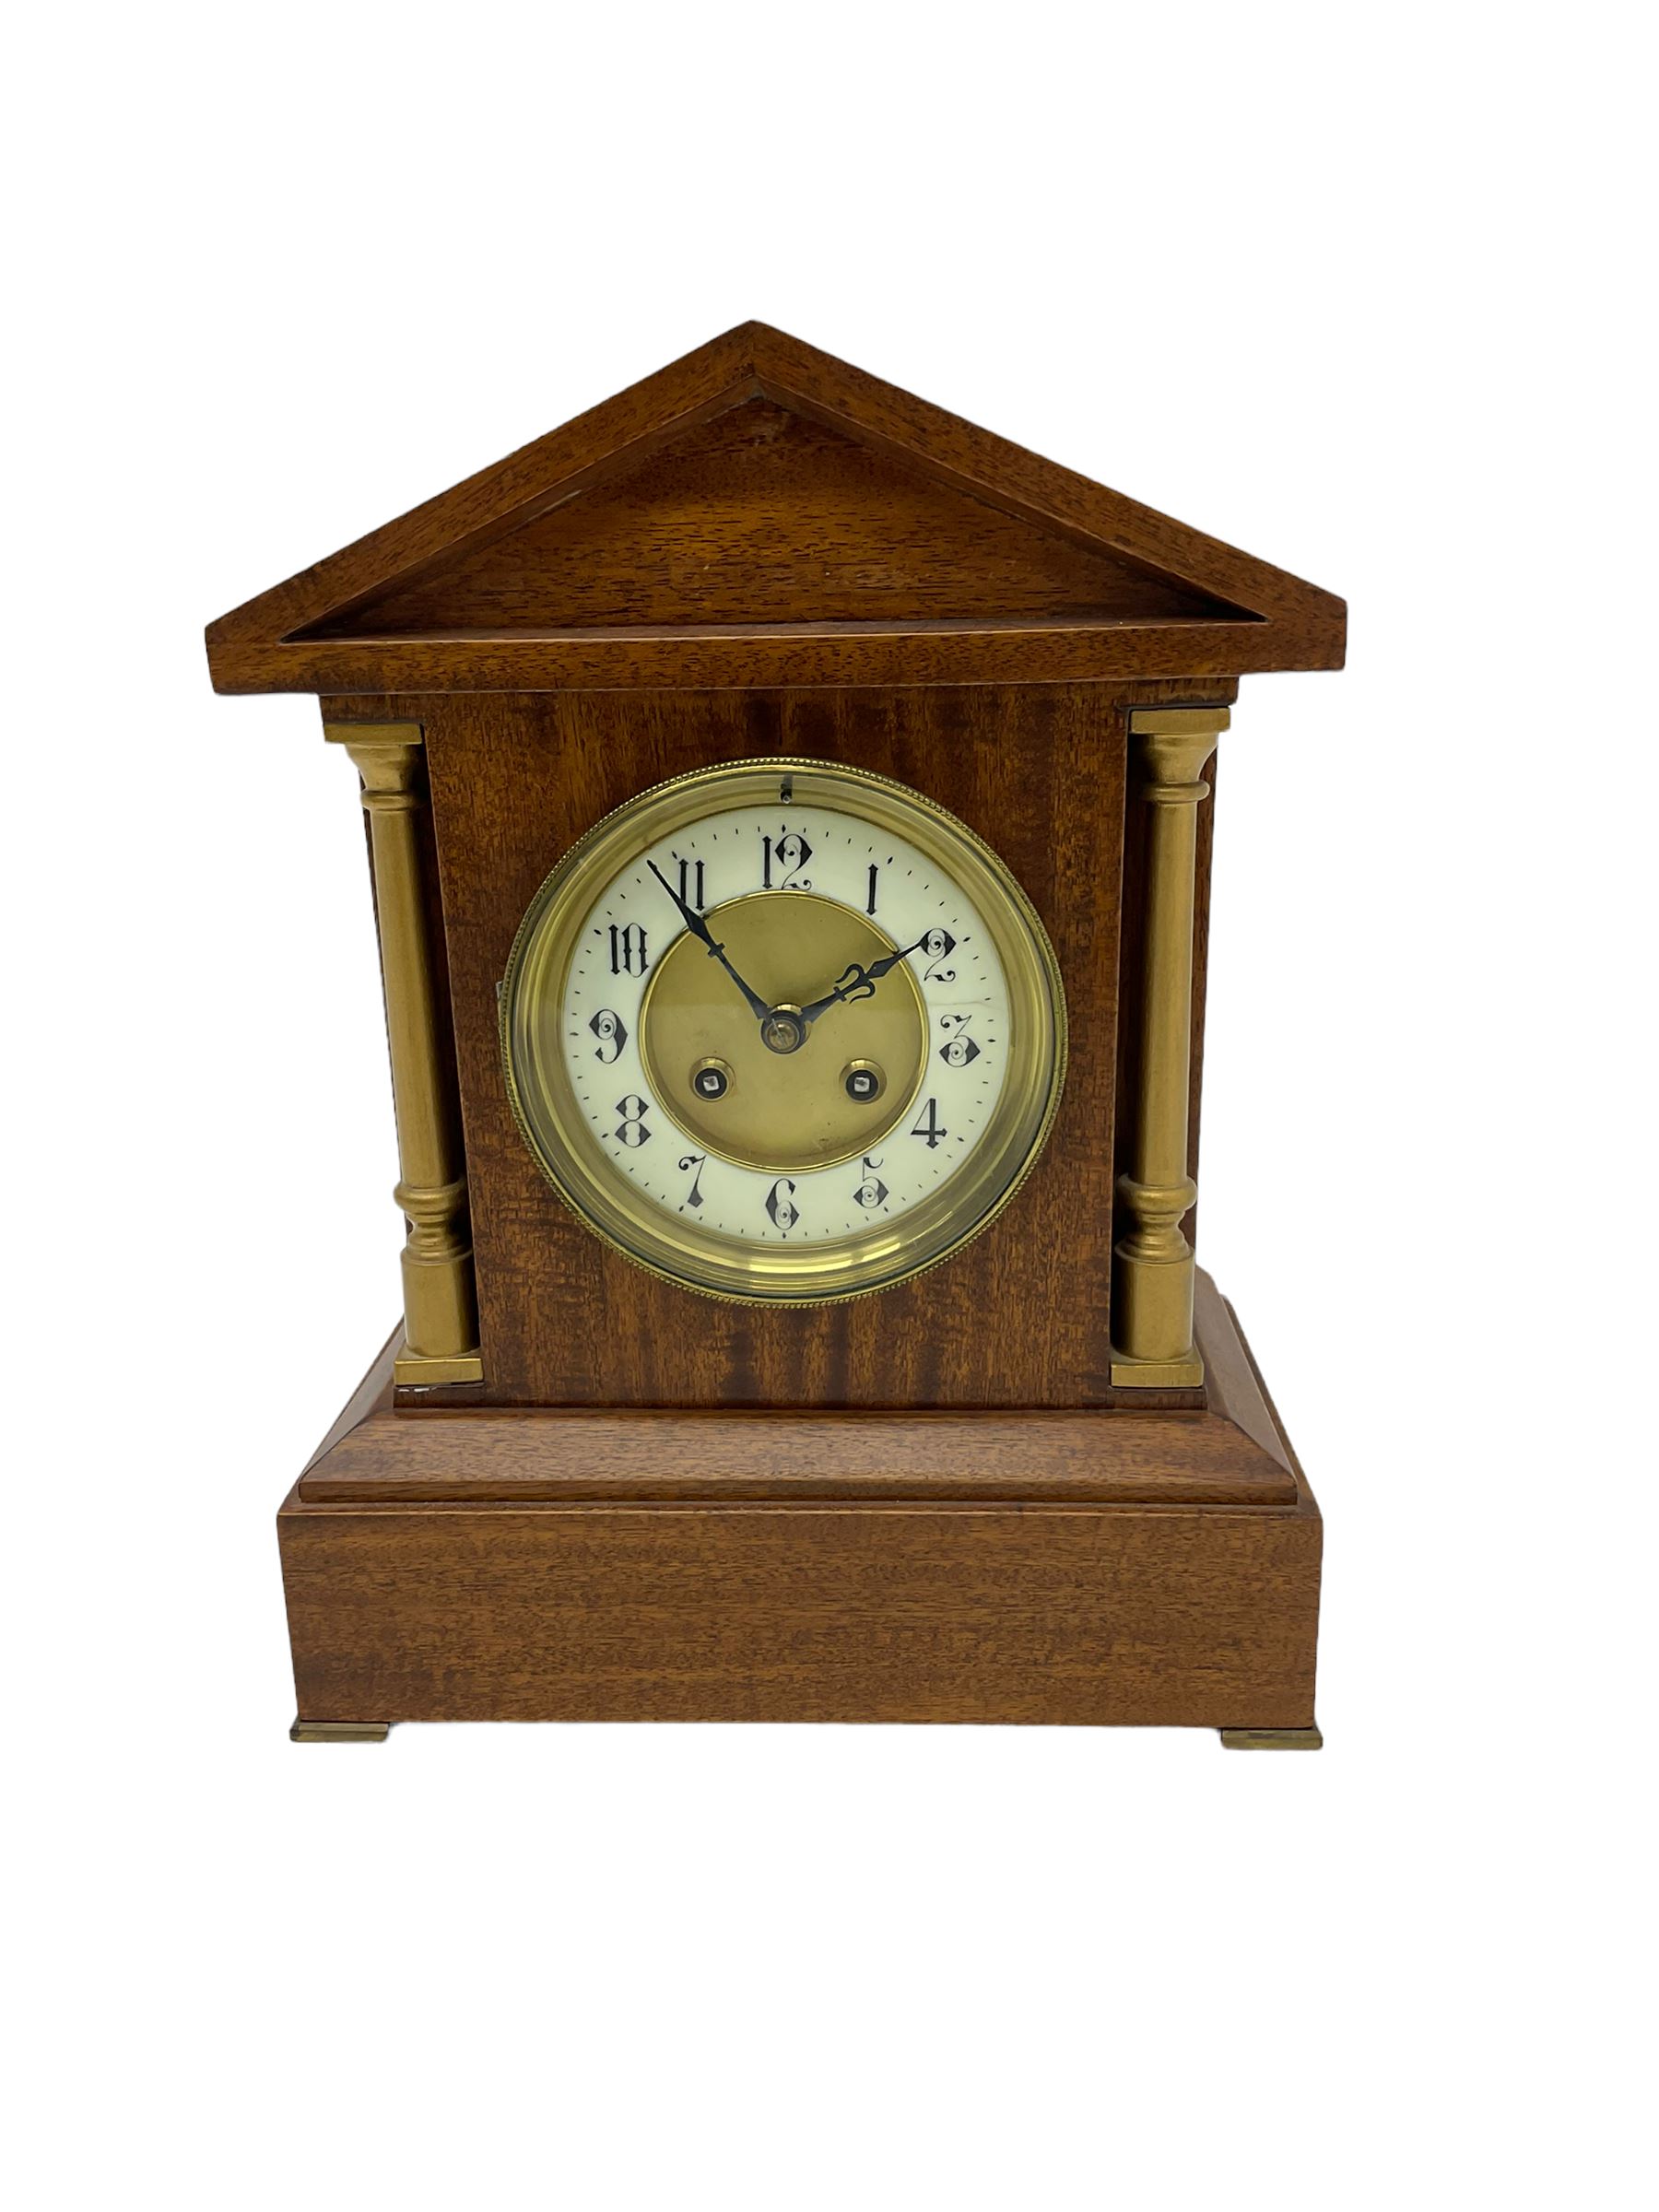 Mahogany cased mantle clock in a bespoke 20th century case with an architectural pediment and recess